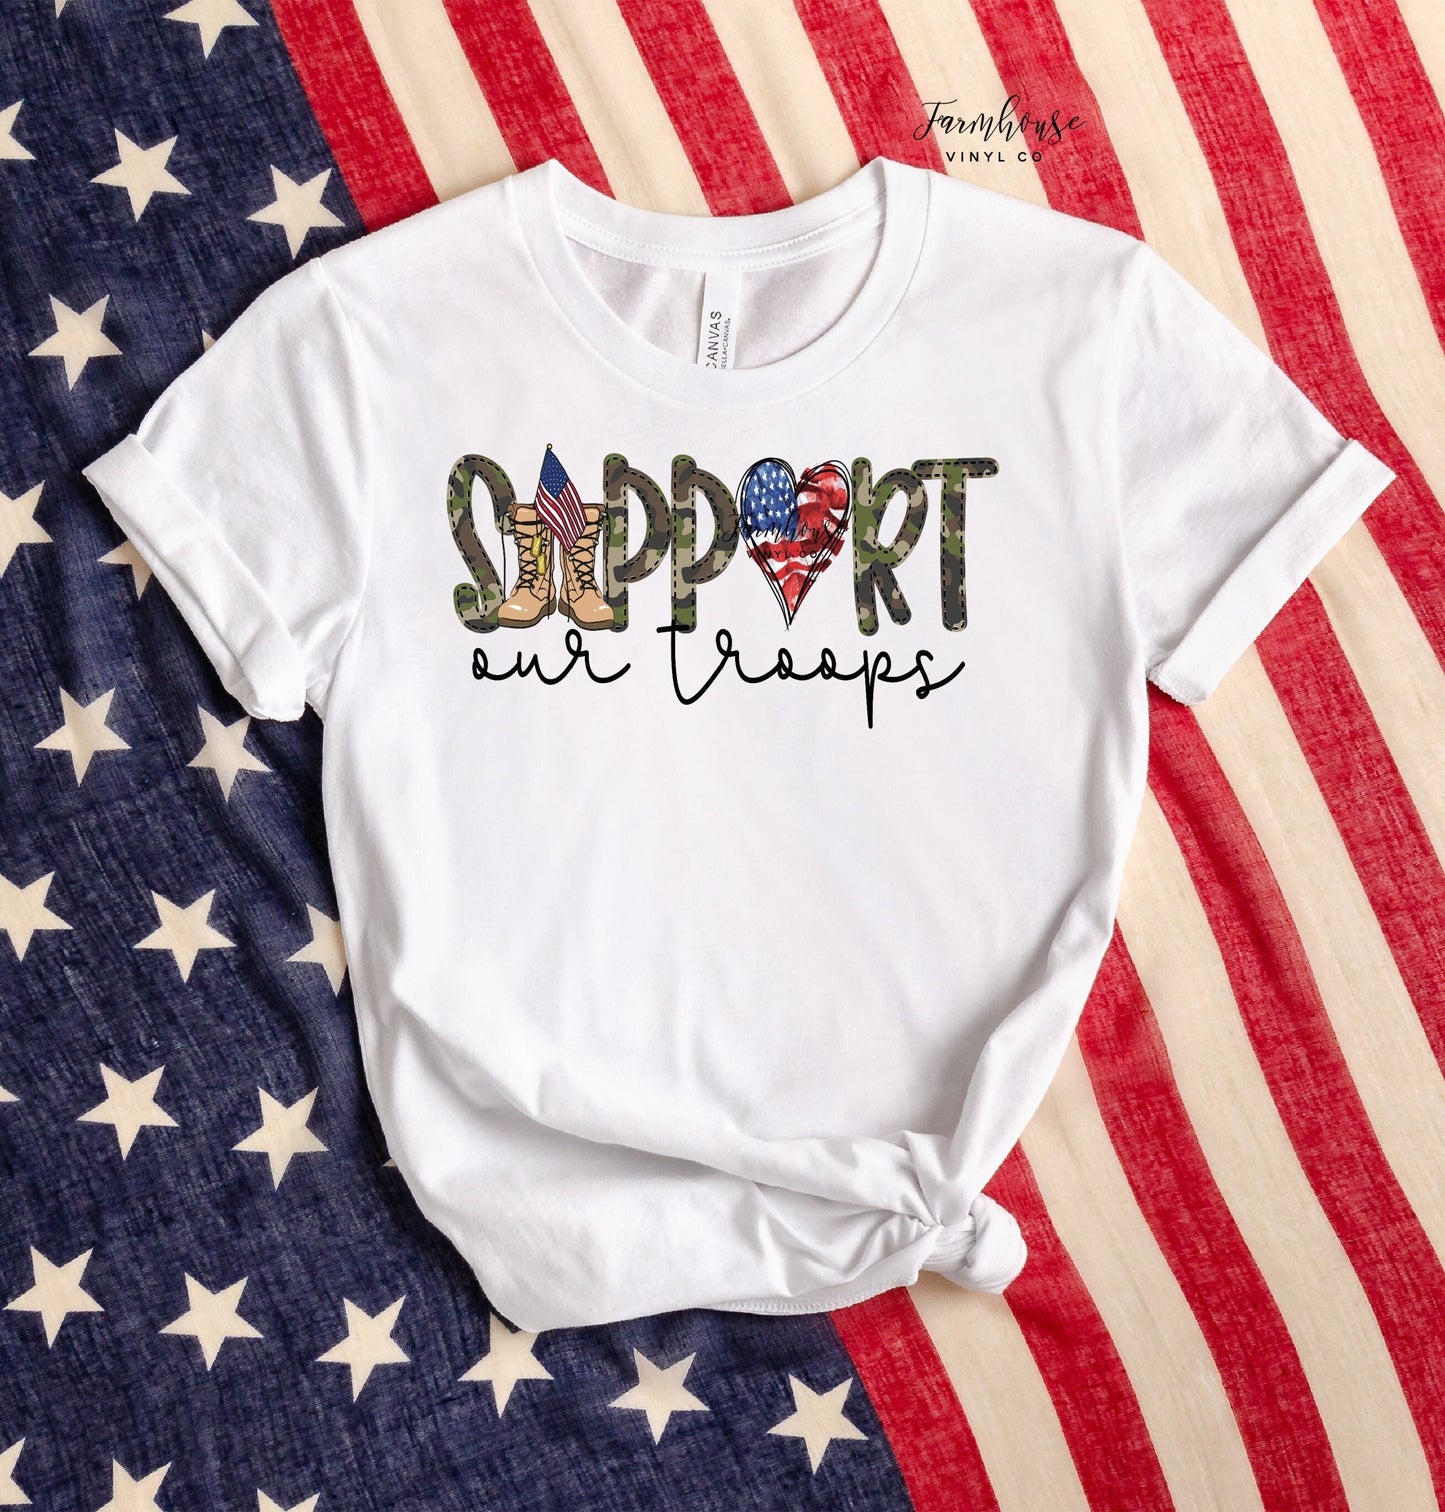 Support Our Troops Military Shirt / American Flag Shirt / Support Our Troops & Veterans / Freedom Shirt / Military Spouse Shirt / American - Farmhouse Vinyl Co